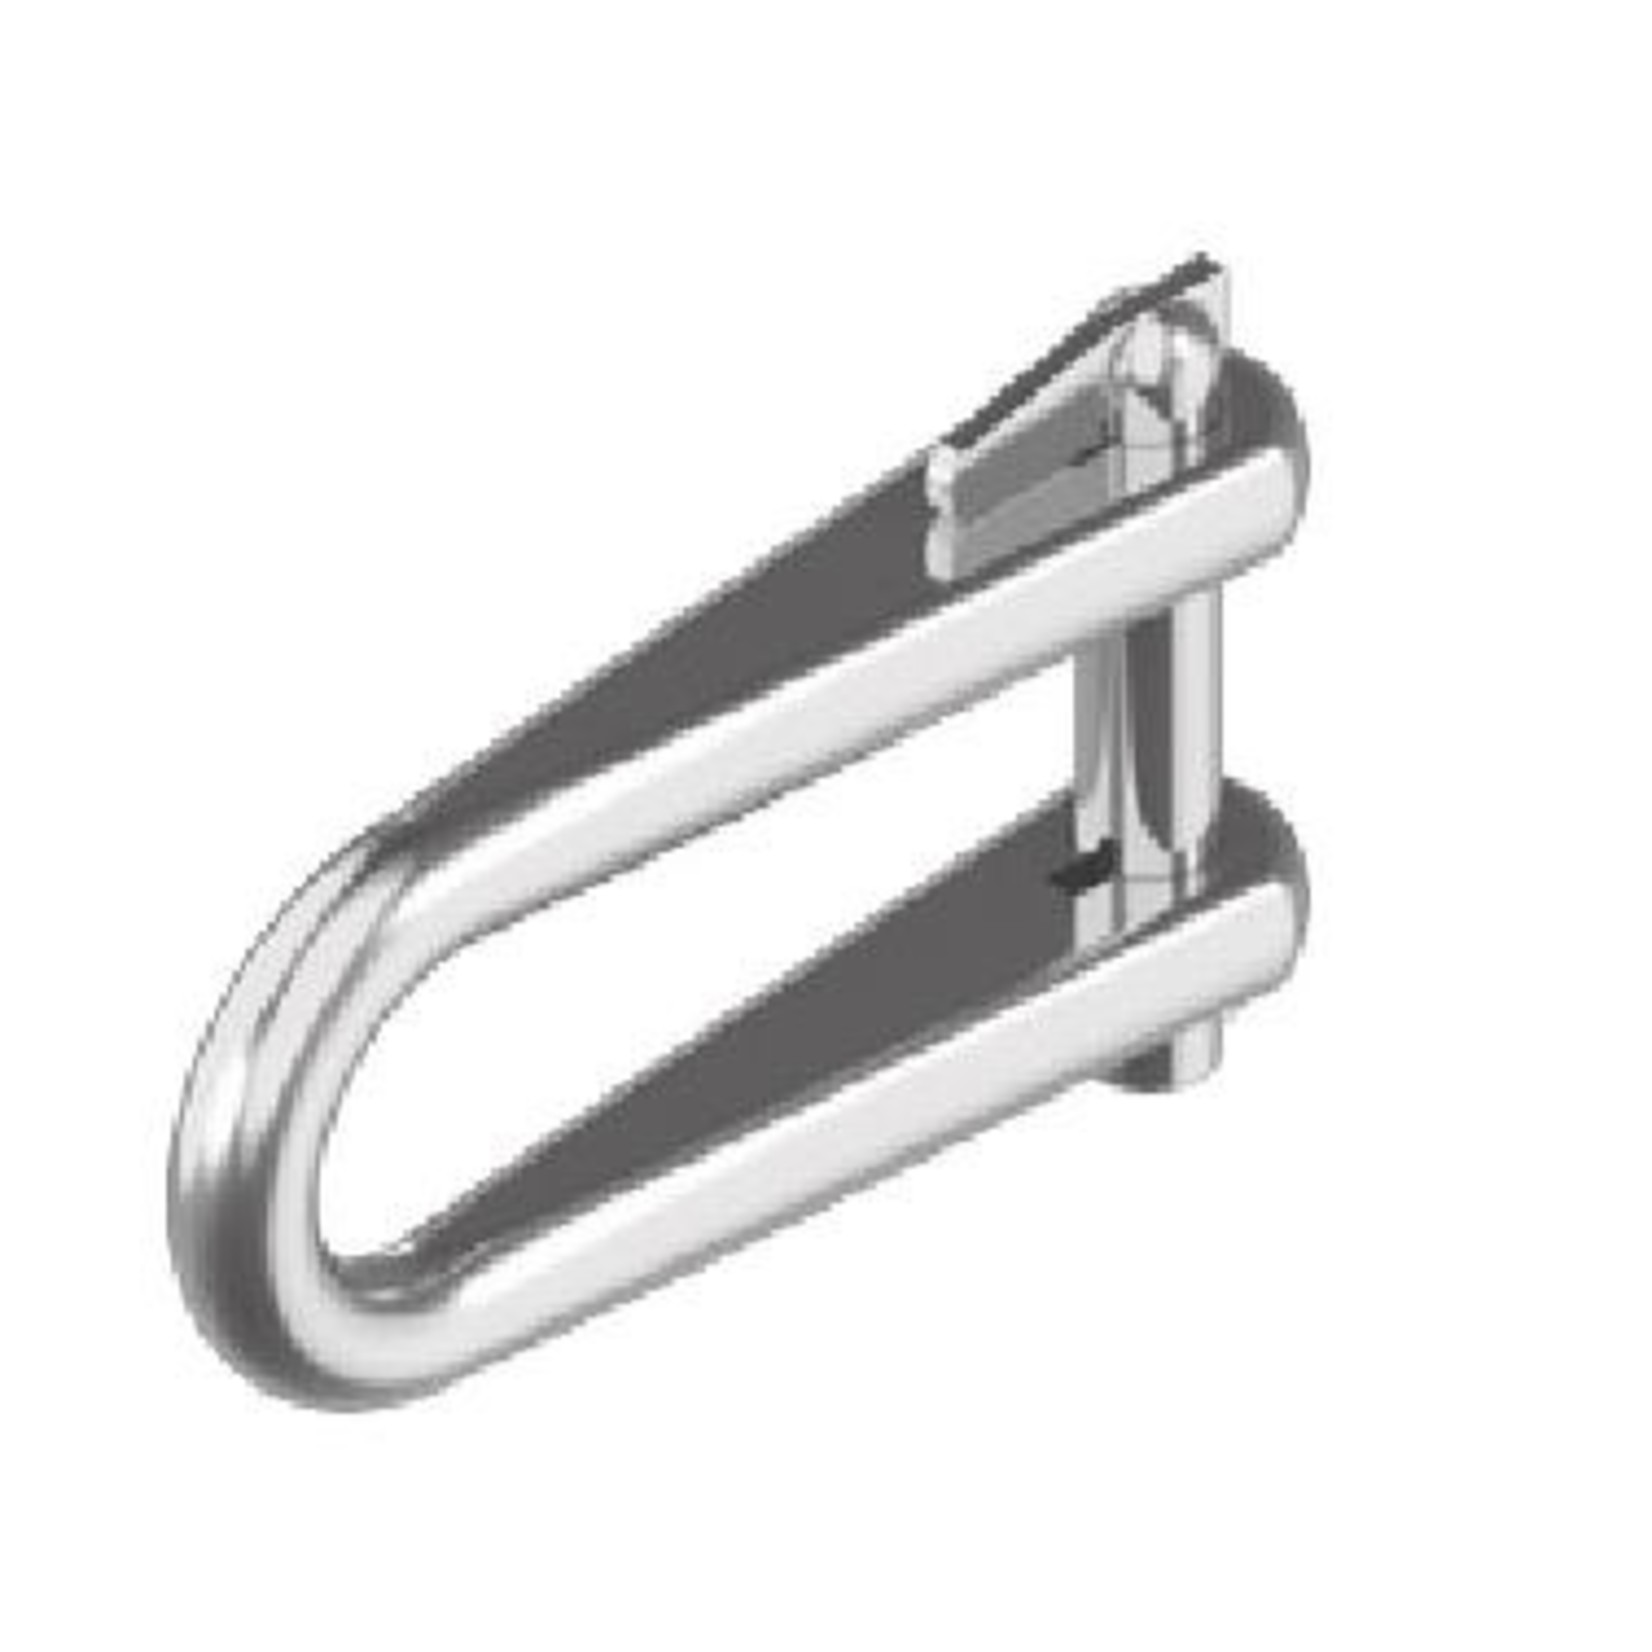 Key pin shackle stainless 8mm 10 pcs